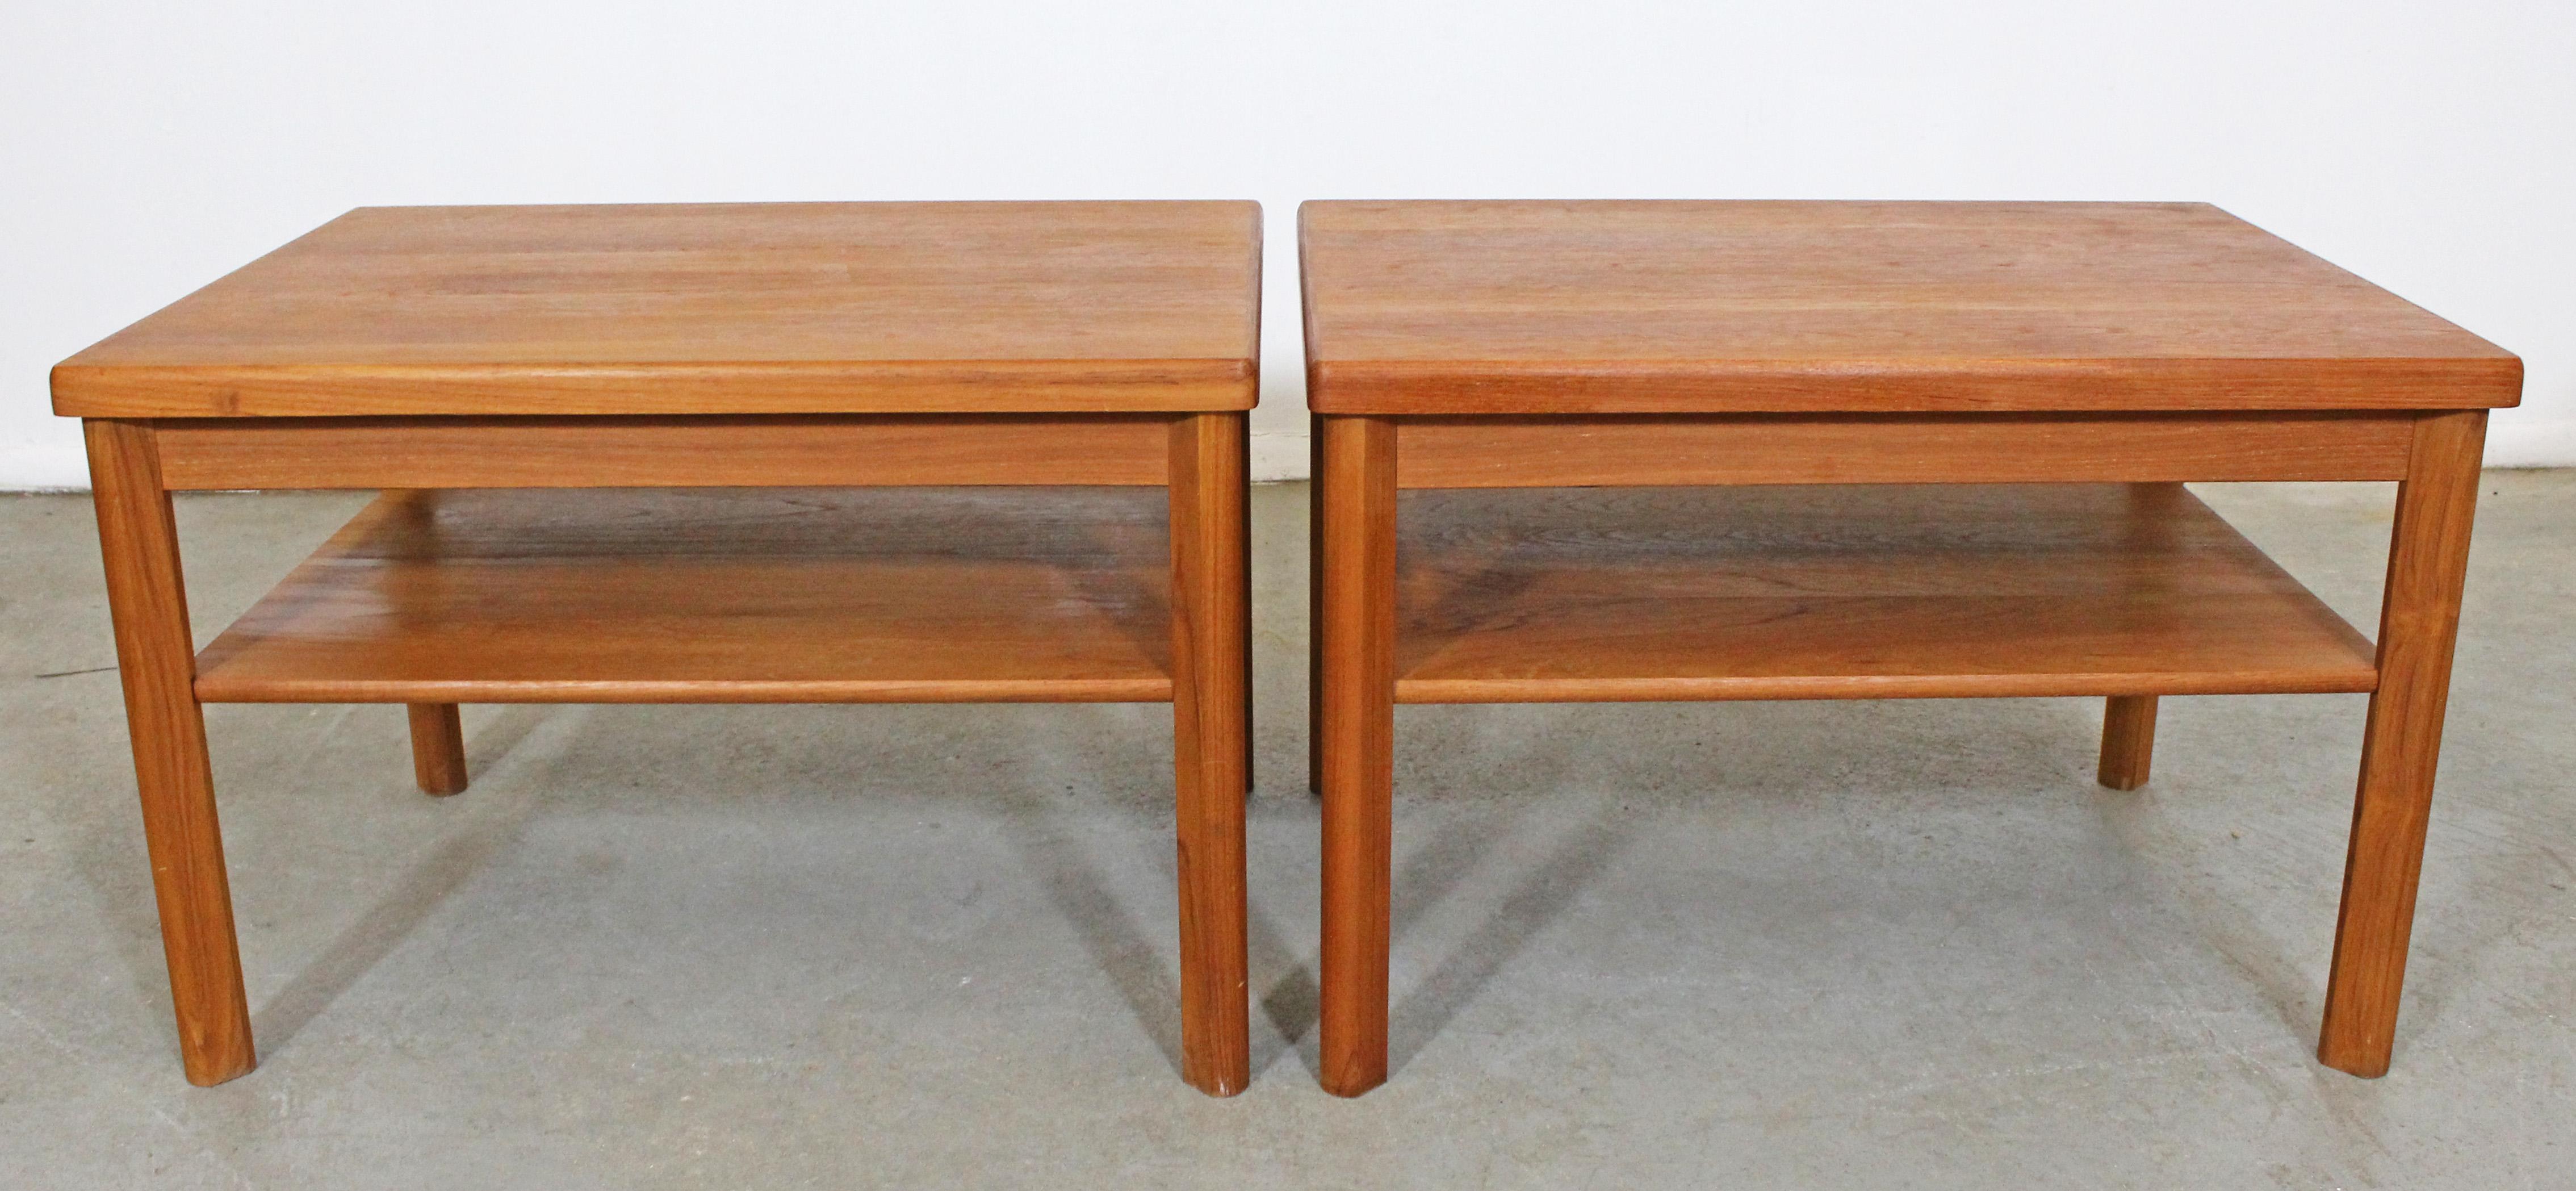 Offered is a pair of midcentury Danish modern teak end tables with two tiers, made by Mobelfabrikken Toften. They are in good vintage condition showing slight age wear (scratches, surface wear; see pictures). They are signed.

Dimensions:
29